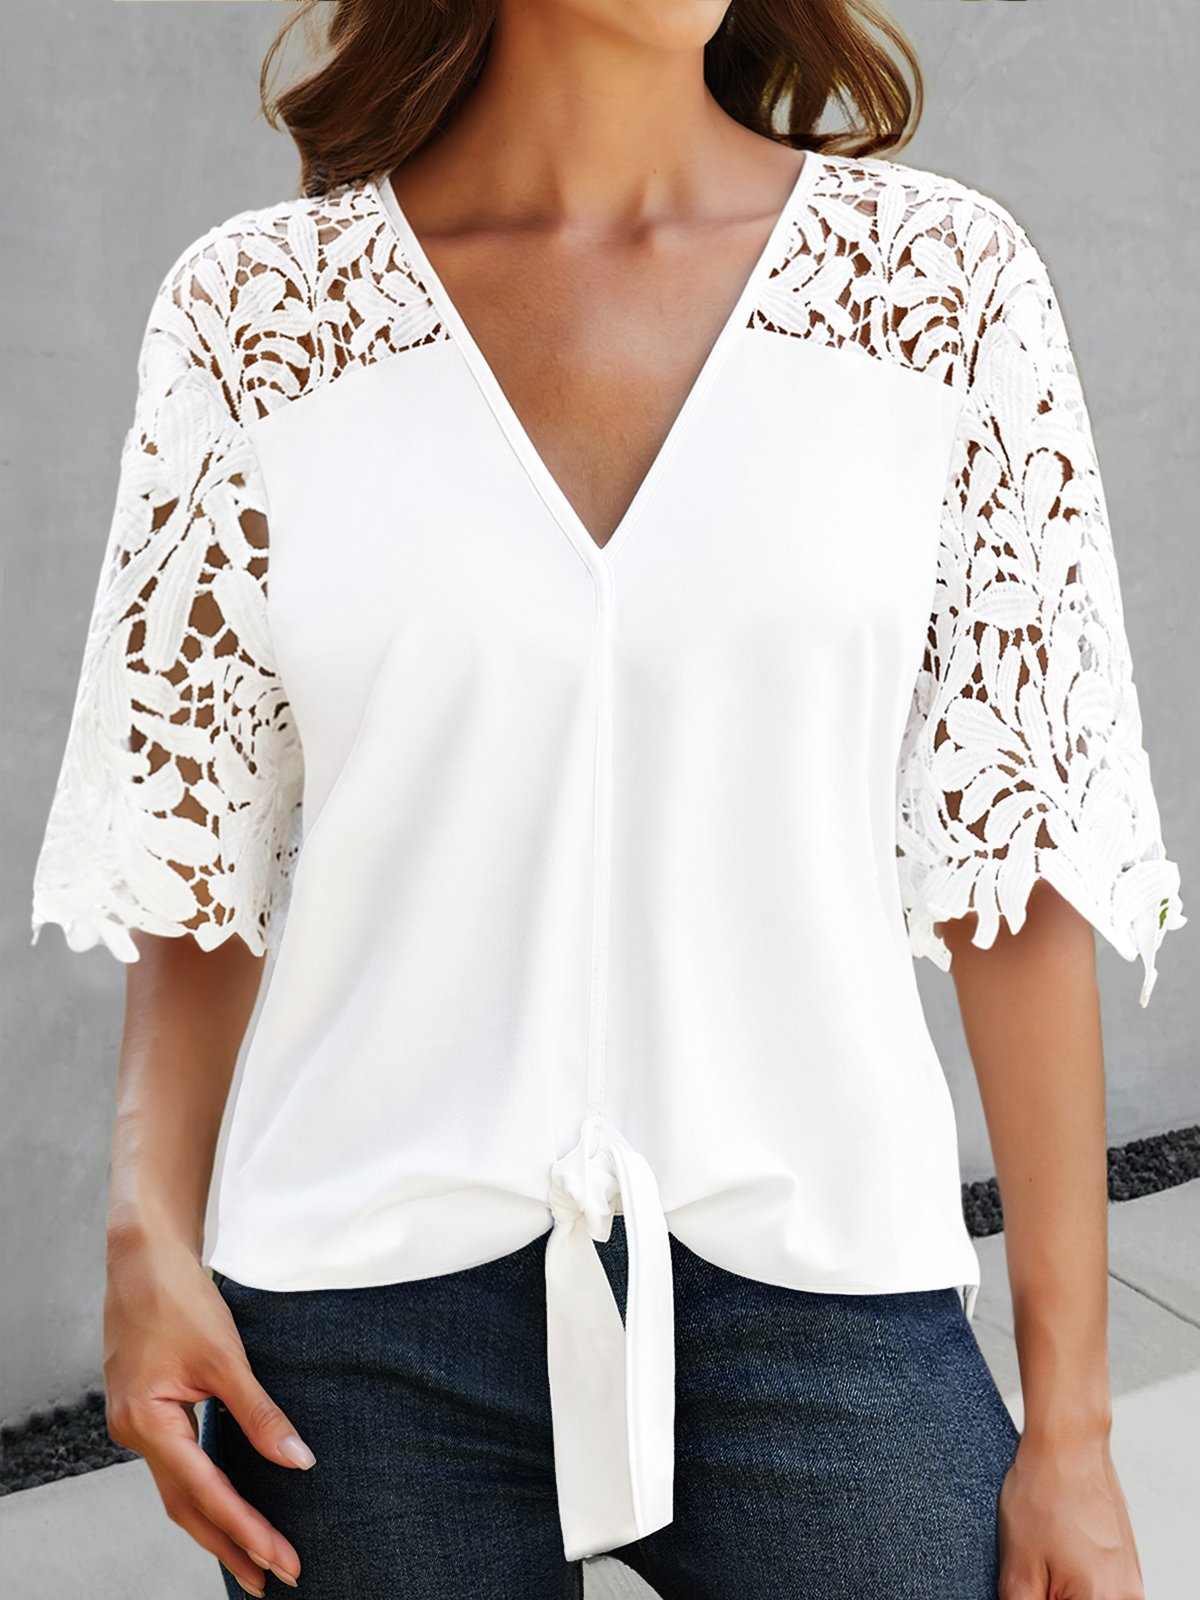 JFN V Neck Lace Casual Plain Knot Front Loose Top | justfashionnow